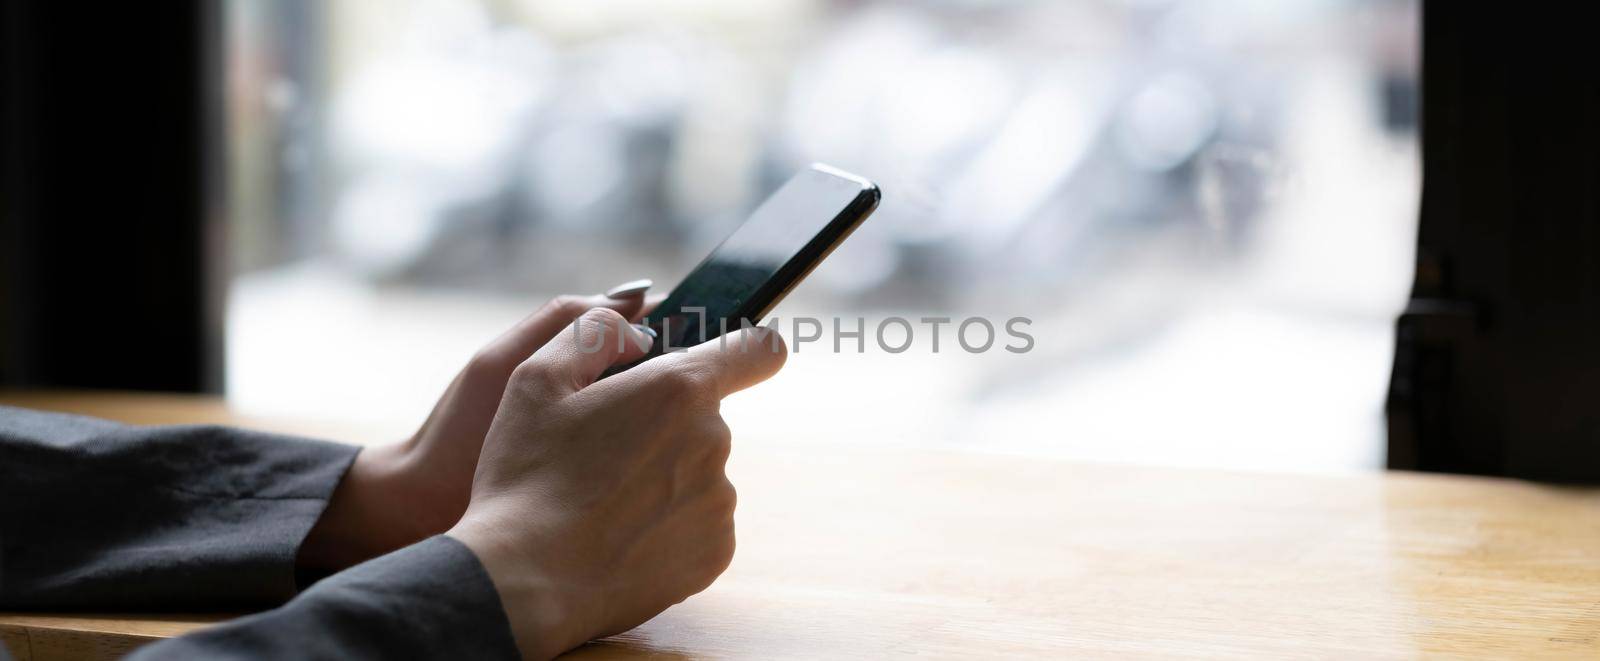 woman using apps on a mobile touchscreen smartphone. Concept for using technology, shopping online, mobile apps, texting, addiction